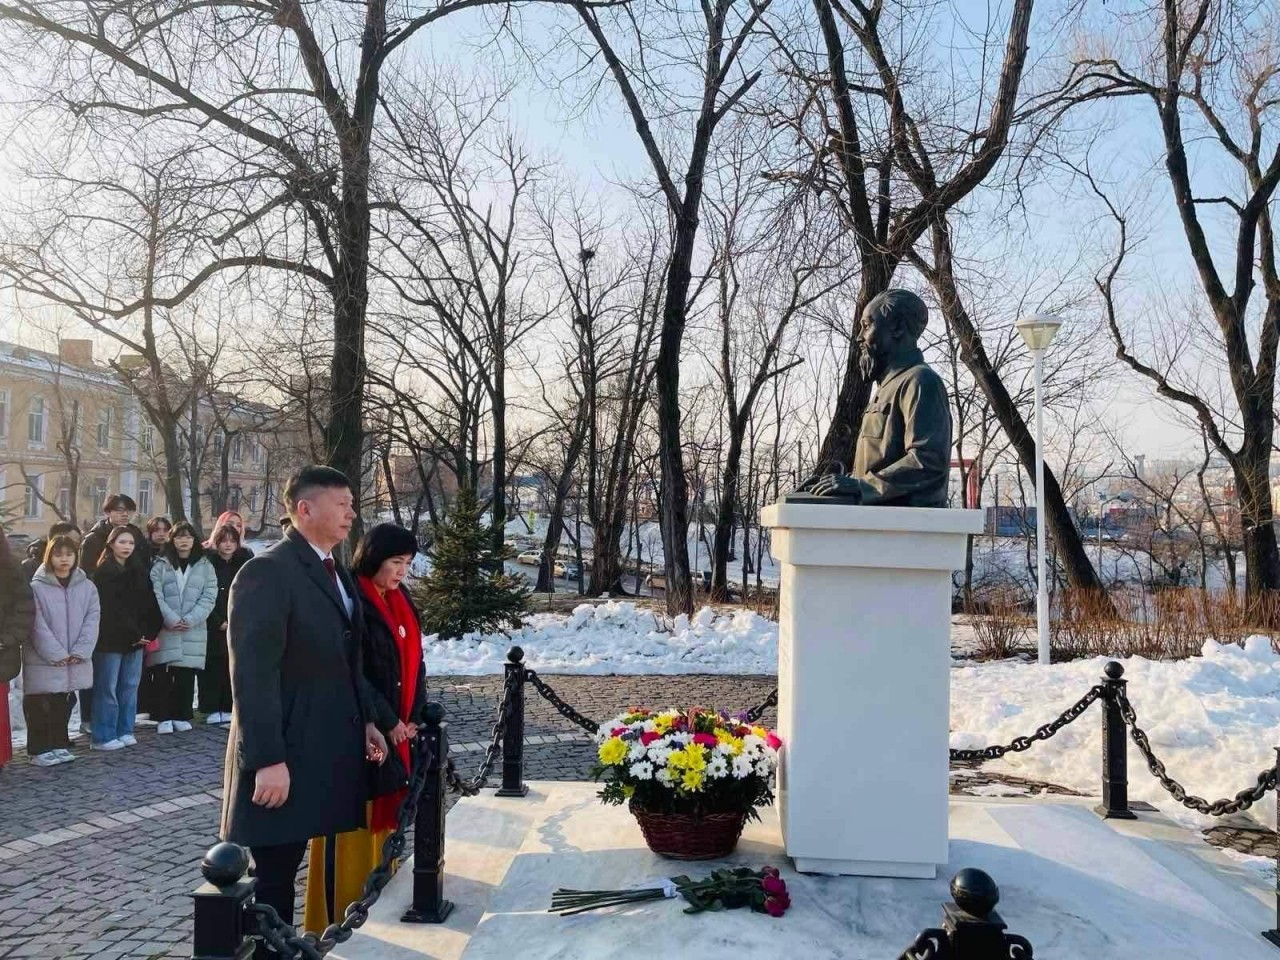 lays flowers at President Ho Chi Minh Monument in A garden on Borishenko street, the Russian city of Vladivostok, named after President Ho Chi Minh.